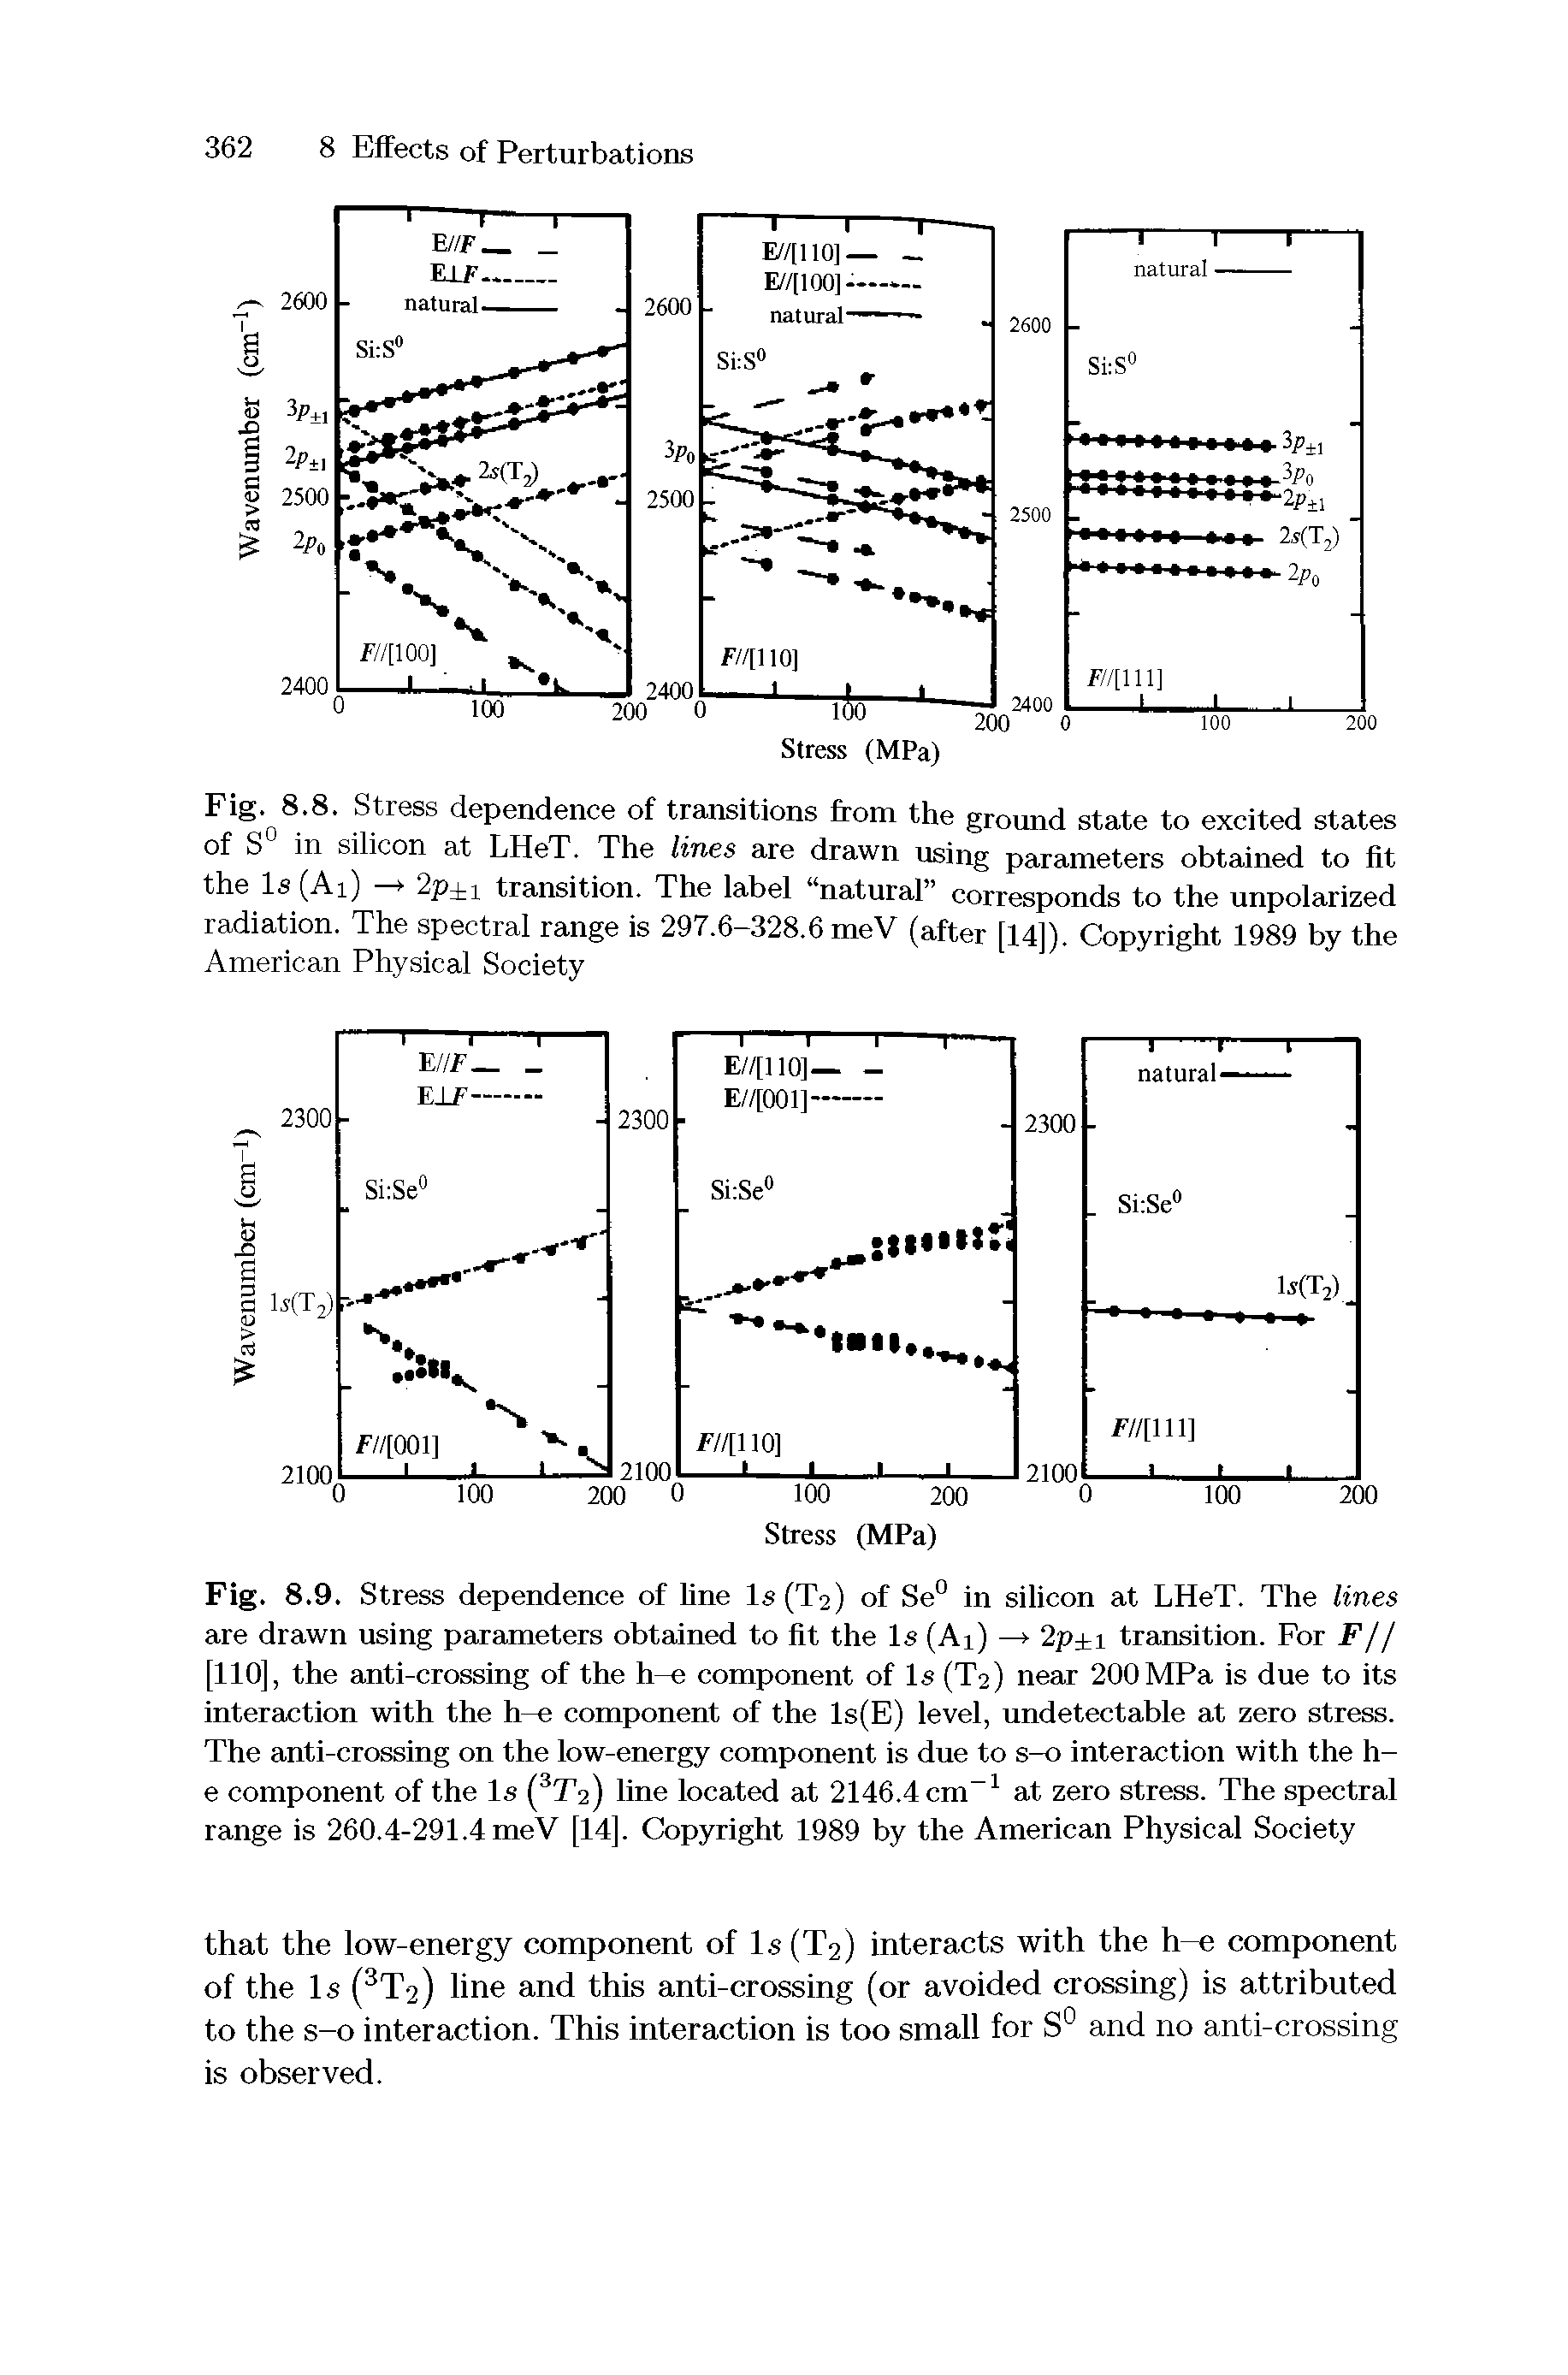 Fig. 8.8. Stress dependence of transitions from the ground state to excited states of S in silicon at LHeT. The lines are drawn using parameters obtained to fit the Is (Ai) > 2p - transition. The label natural corresponds to the unpolarized radiation. The spectral range is 297.6-328.6 meV (after [14]). Copyright 1989 by the American Physical Society...